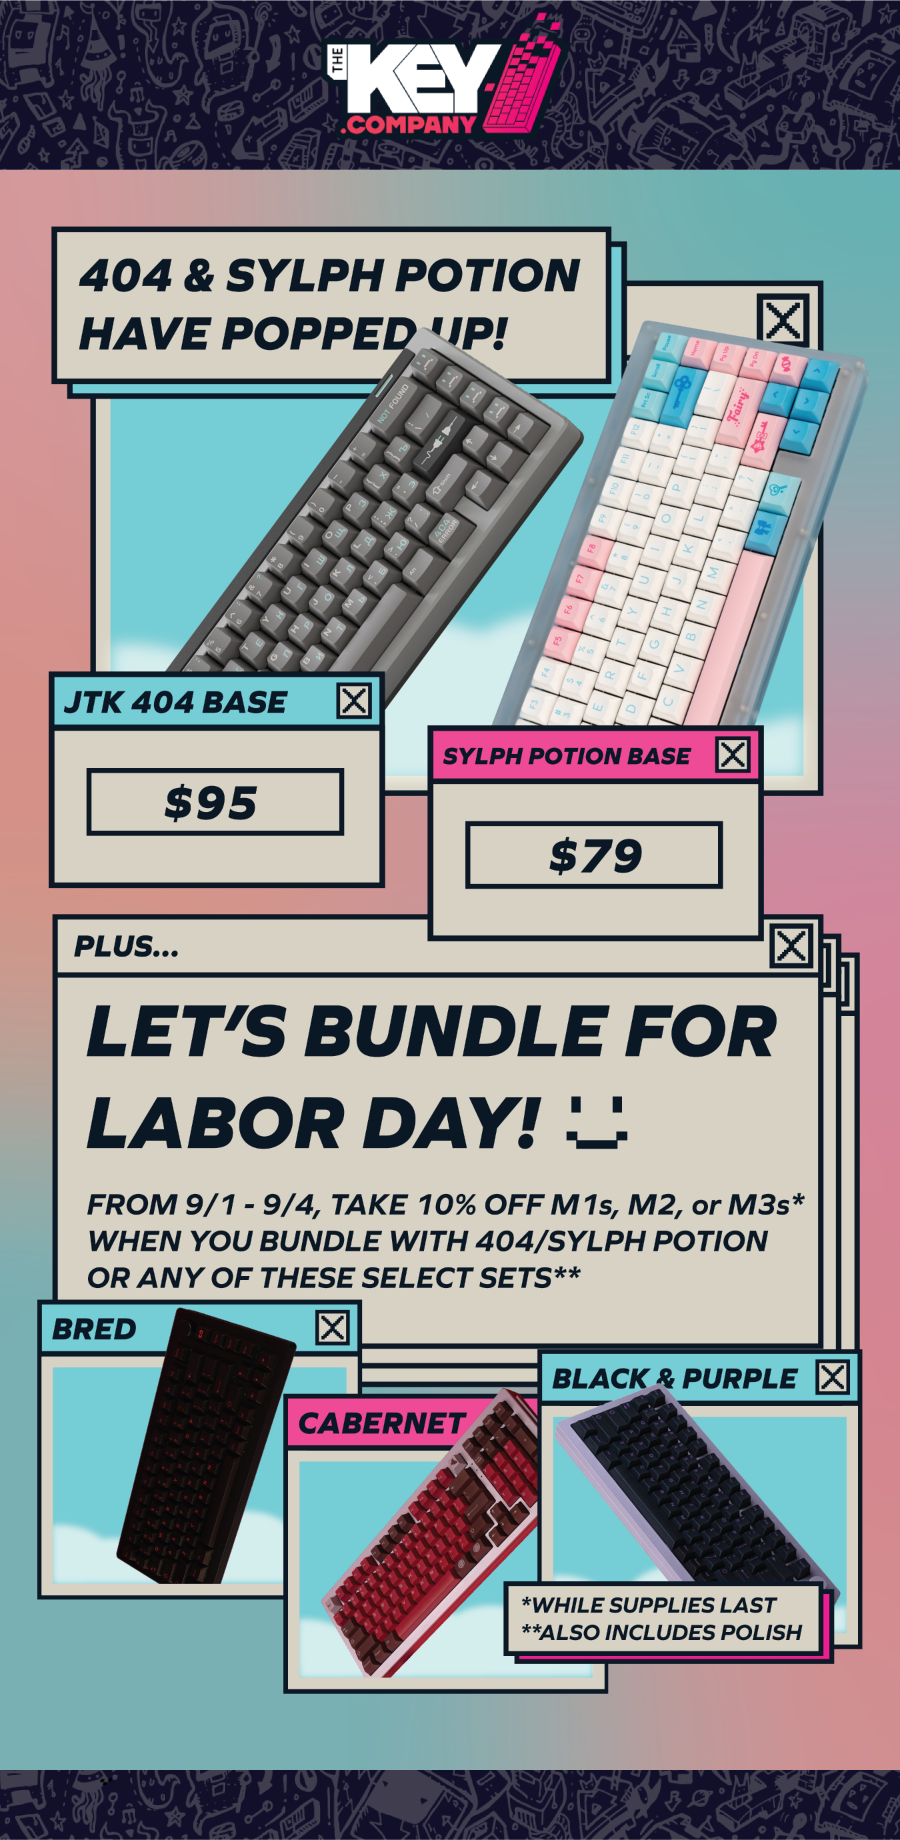 TKC-emails_Labor Day.png